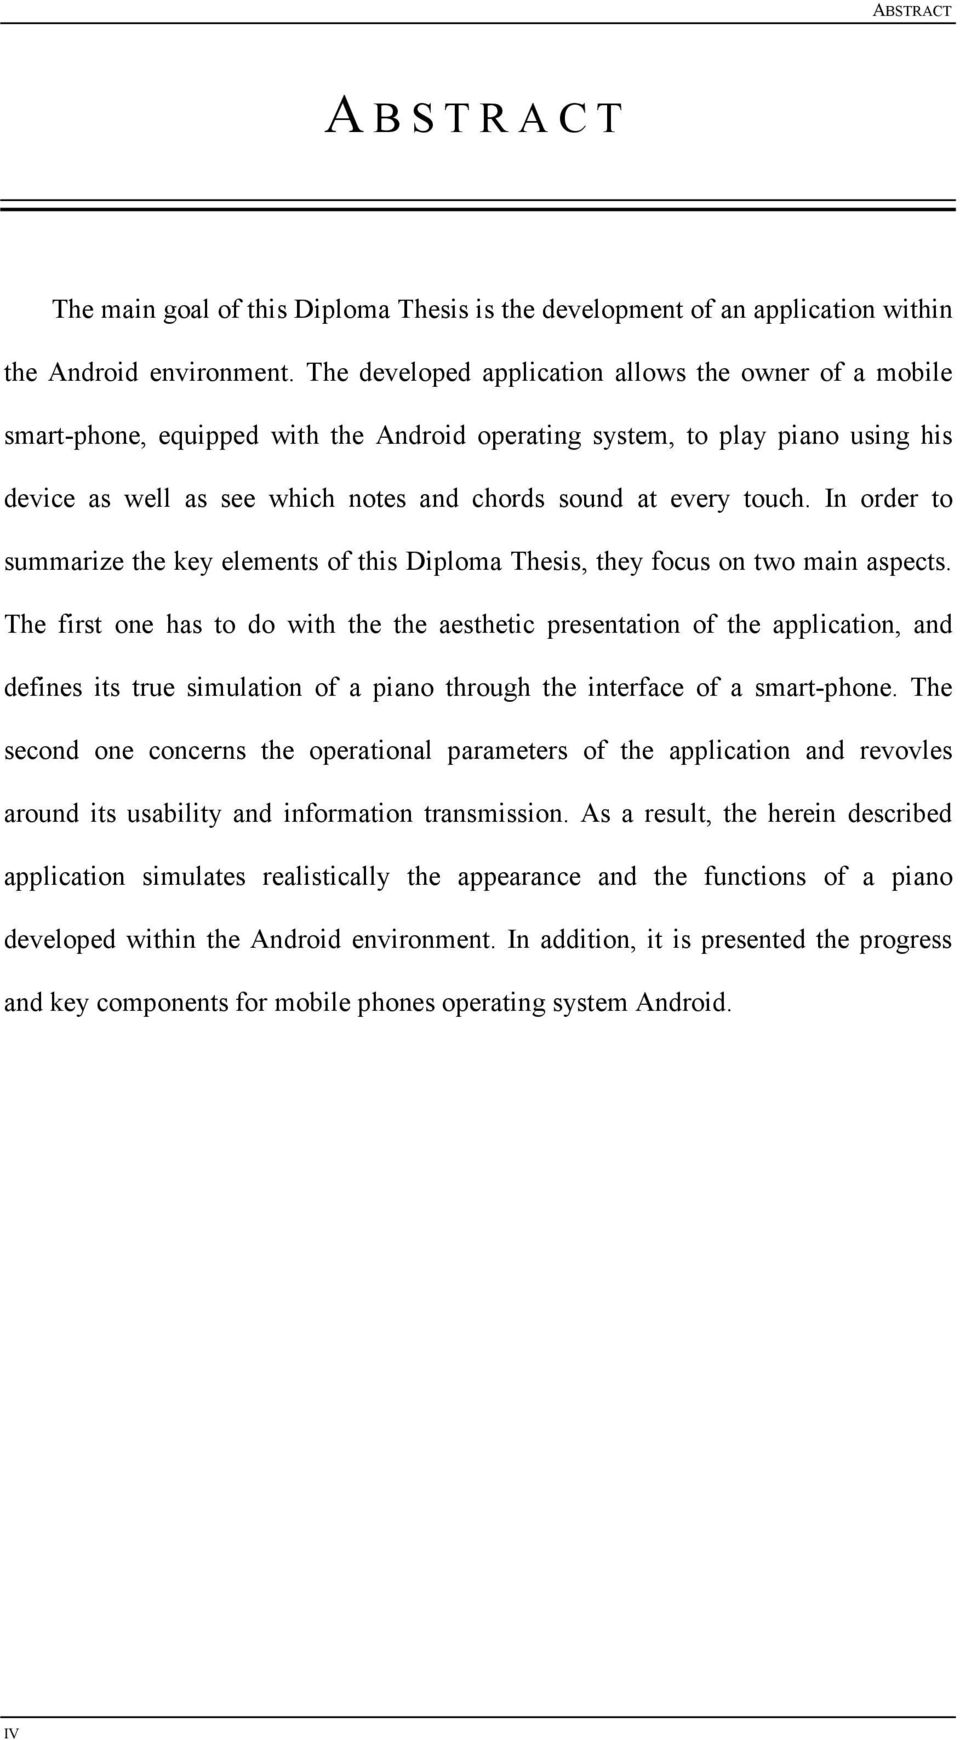 touch. In order to summarize the key elements of this Diploma Thesis, they focus on two main aspects.